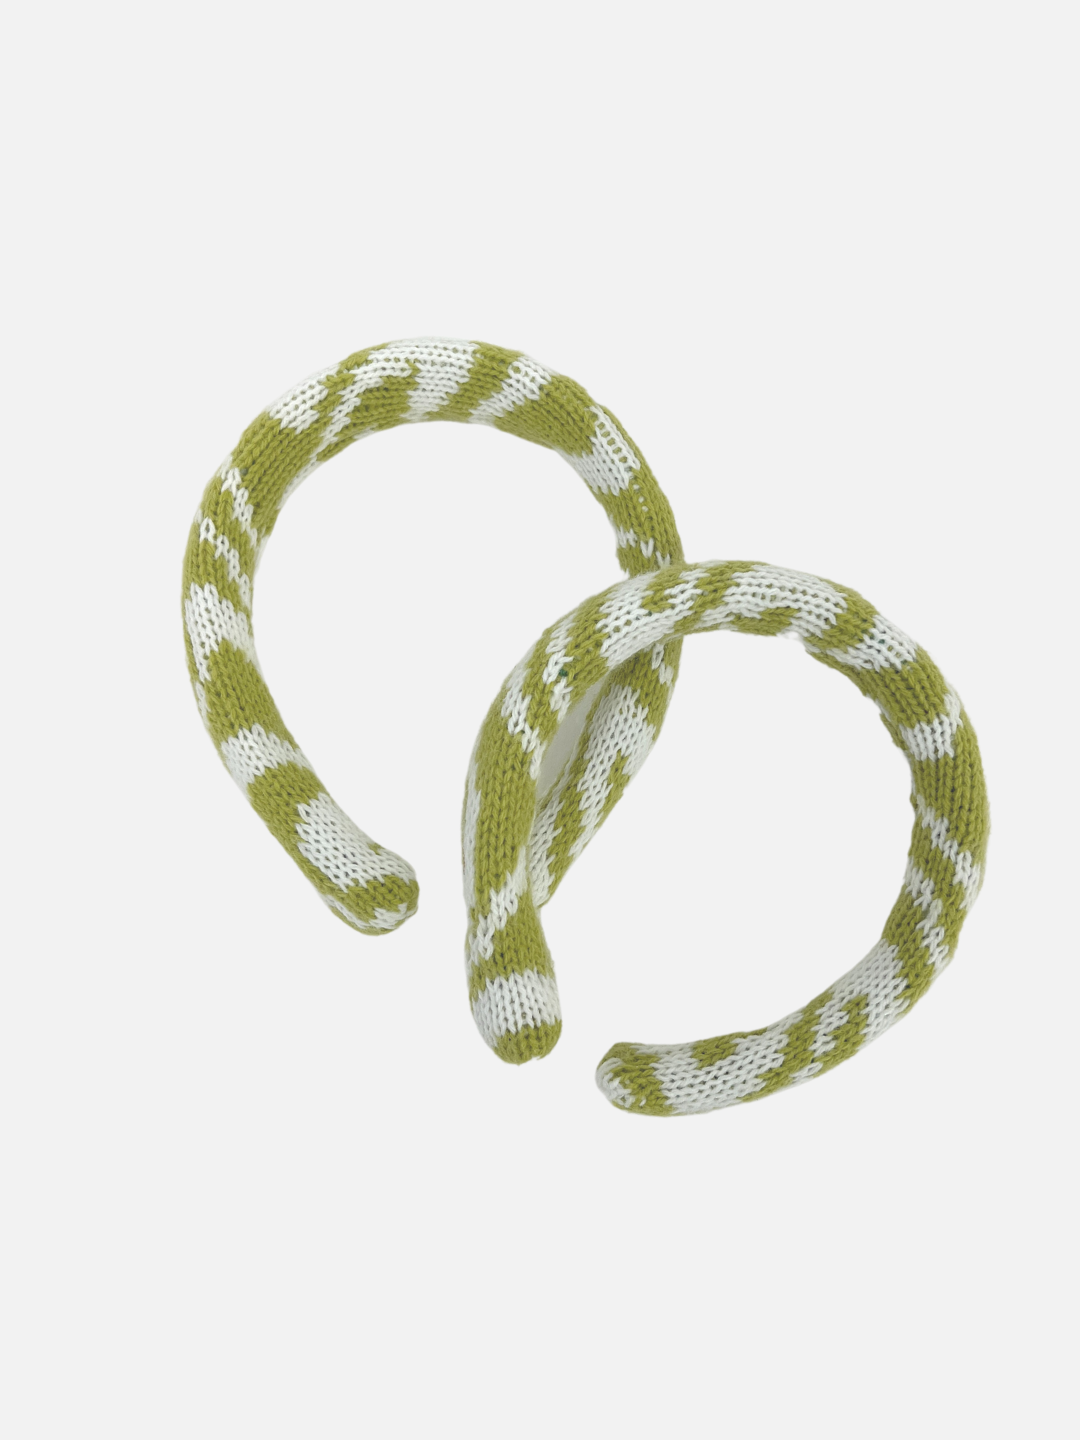 Green/White Swirl | Two sizes of kids' knitted headband in swirls of pale green and white